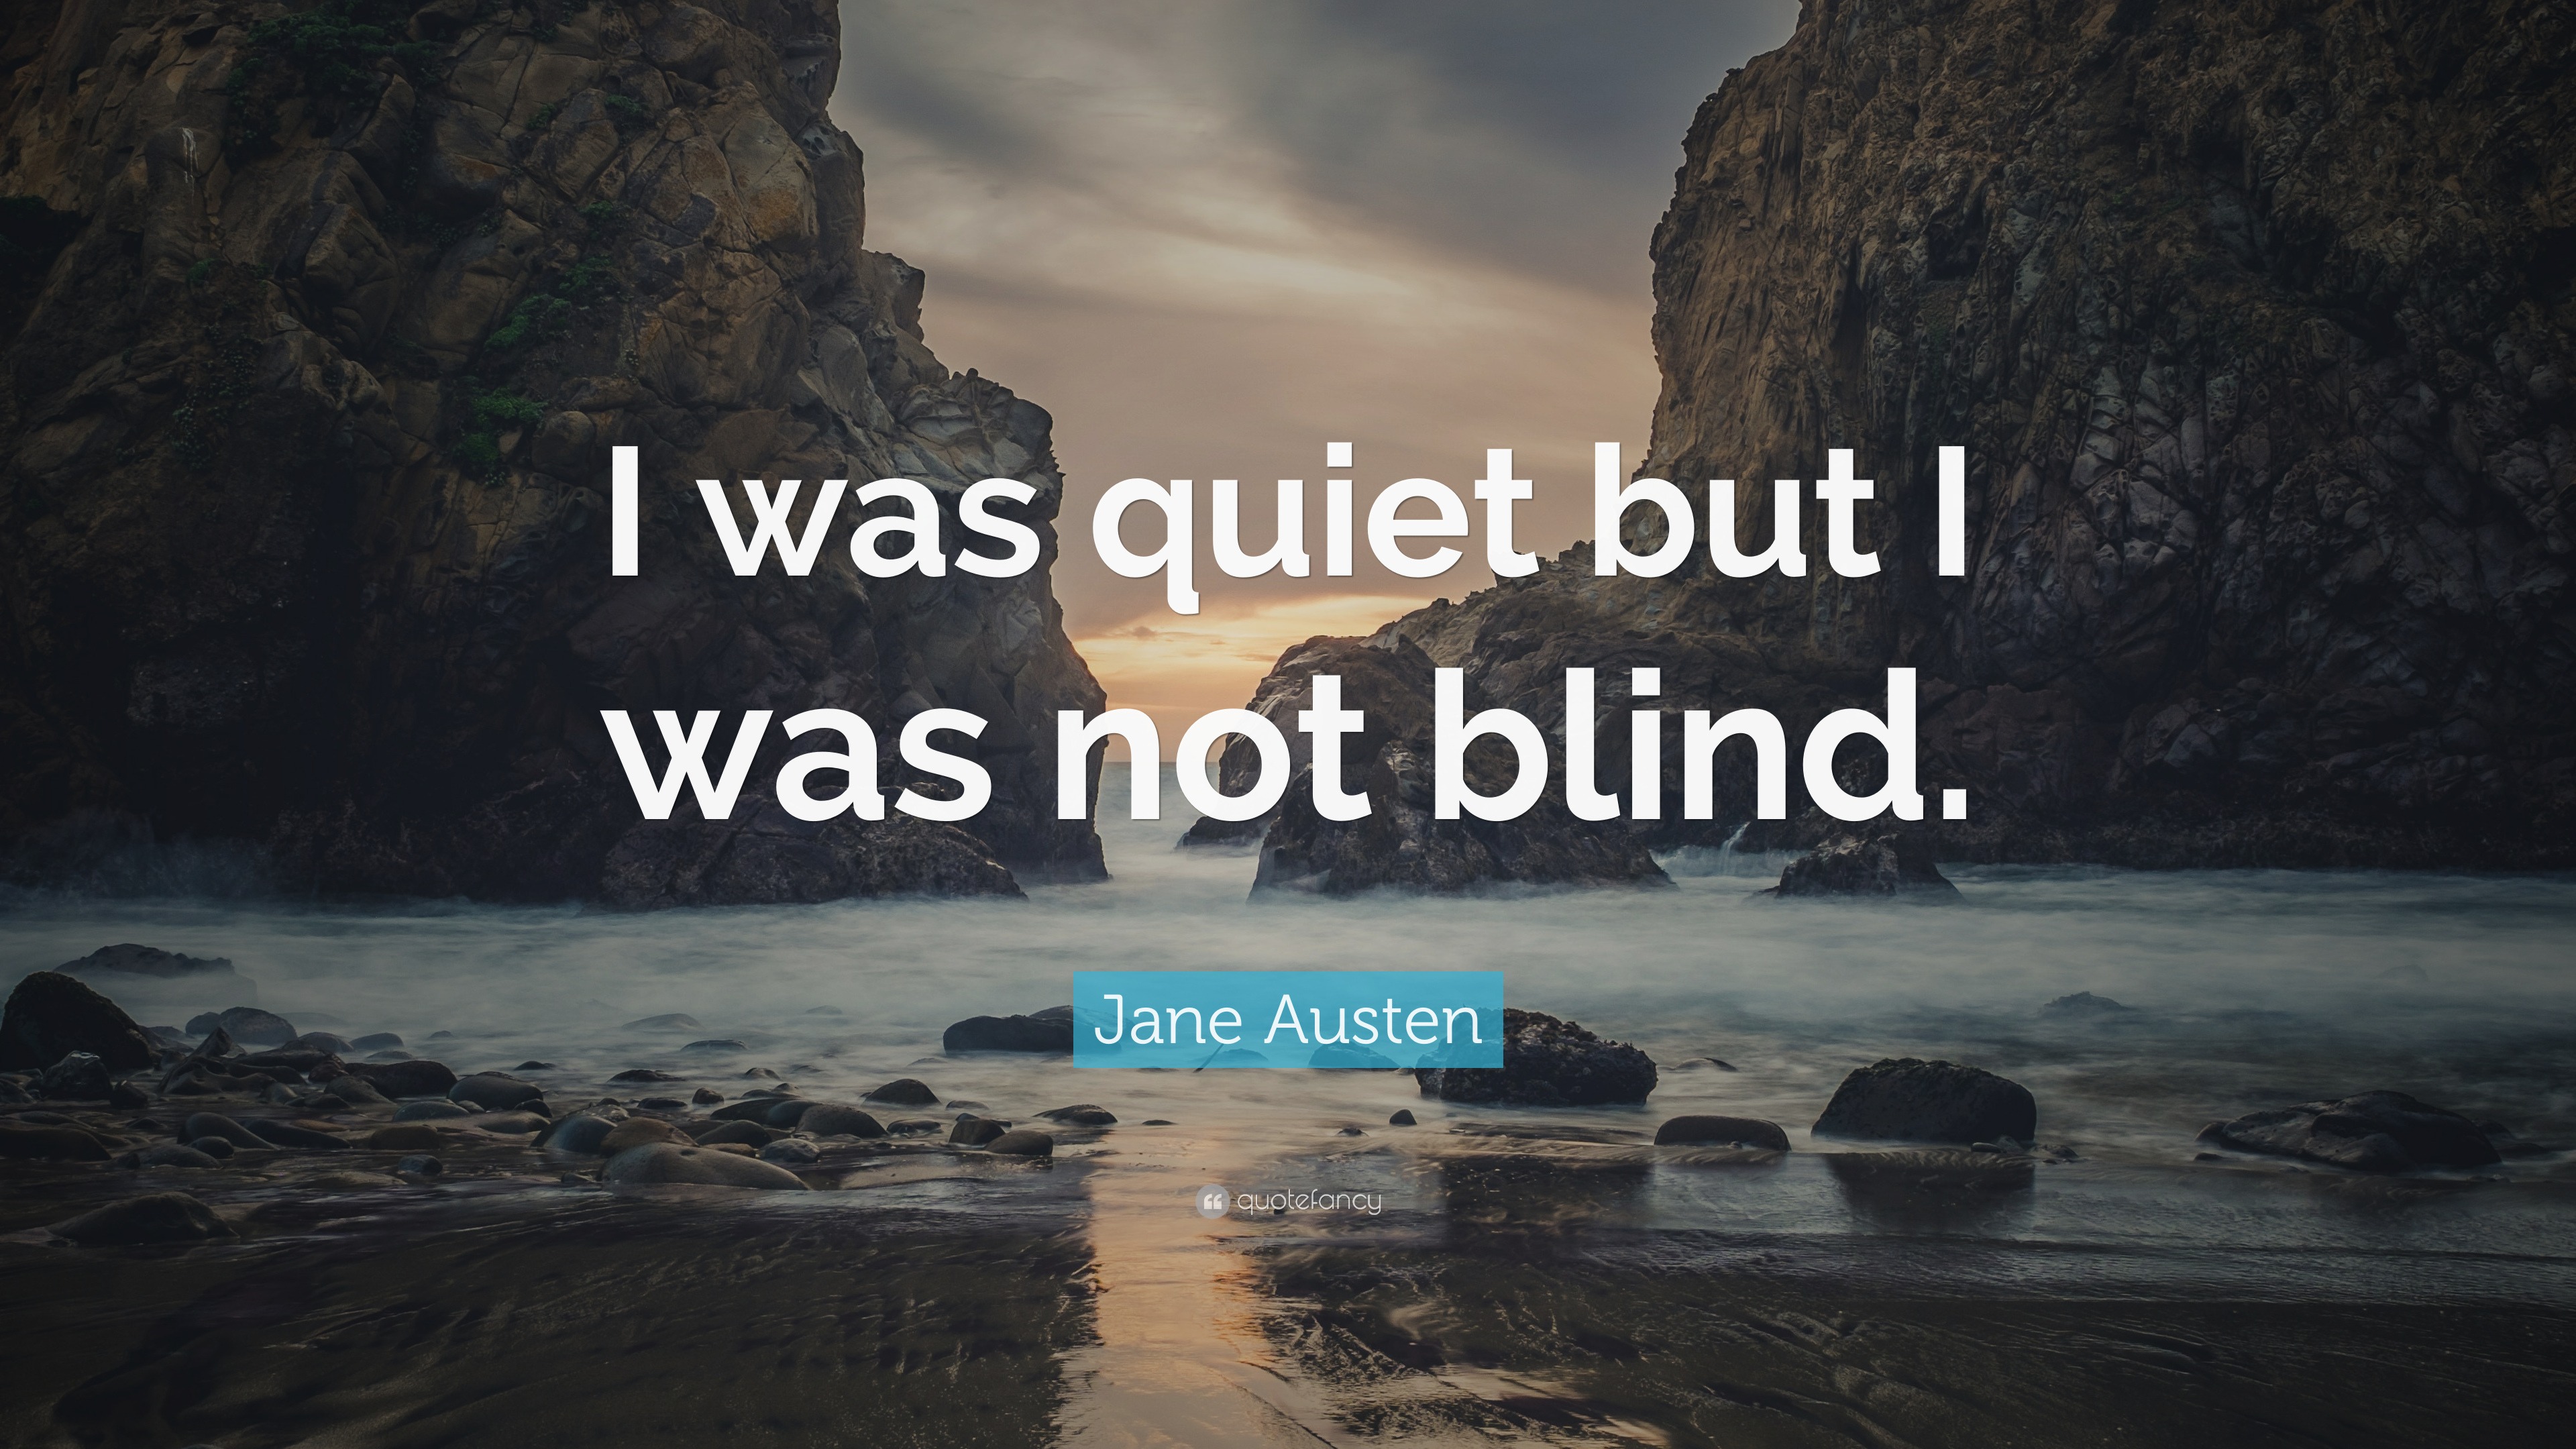 Jane Austen Quote: “I was quiet but I was not blind.” (12 wallpapers